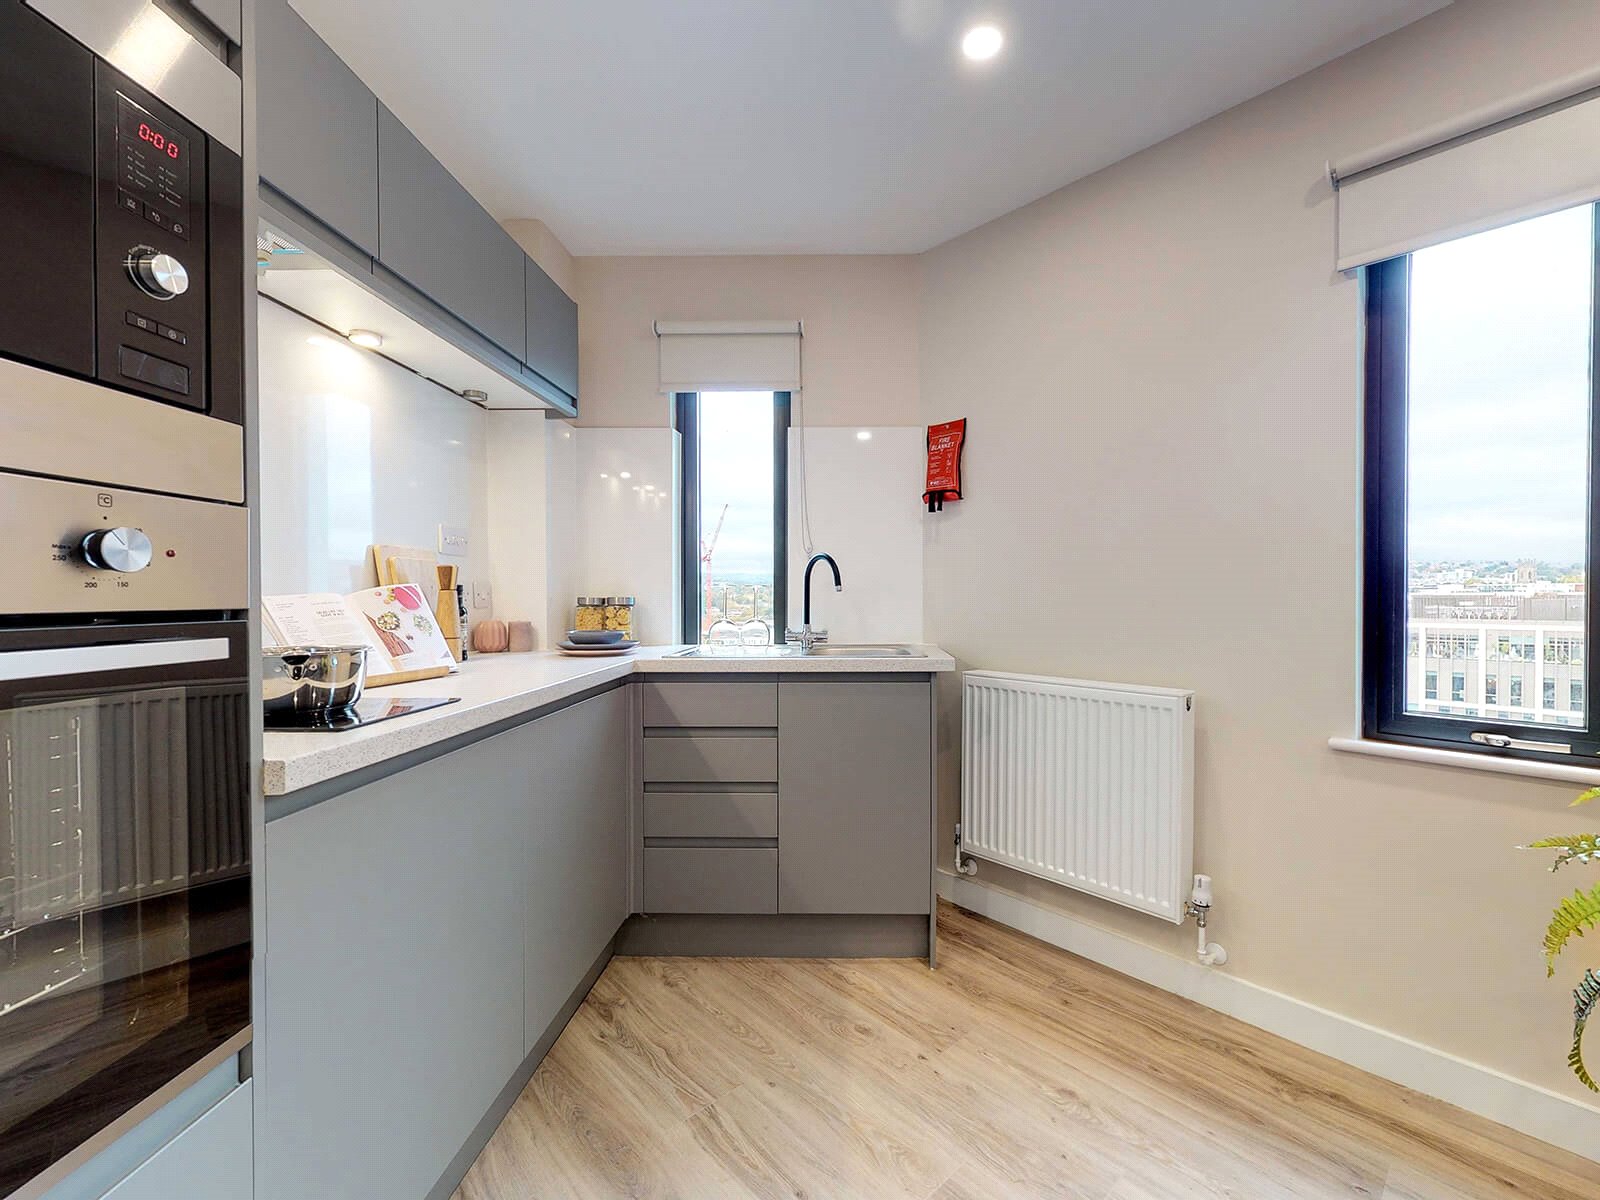 1 bed apartment  for rent in Sheffield. From YPP - Sheffield